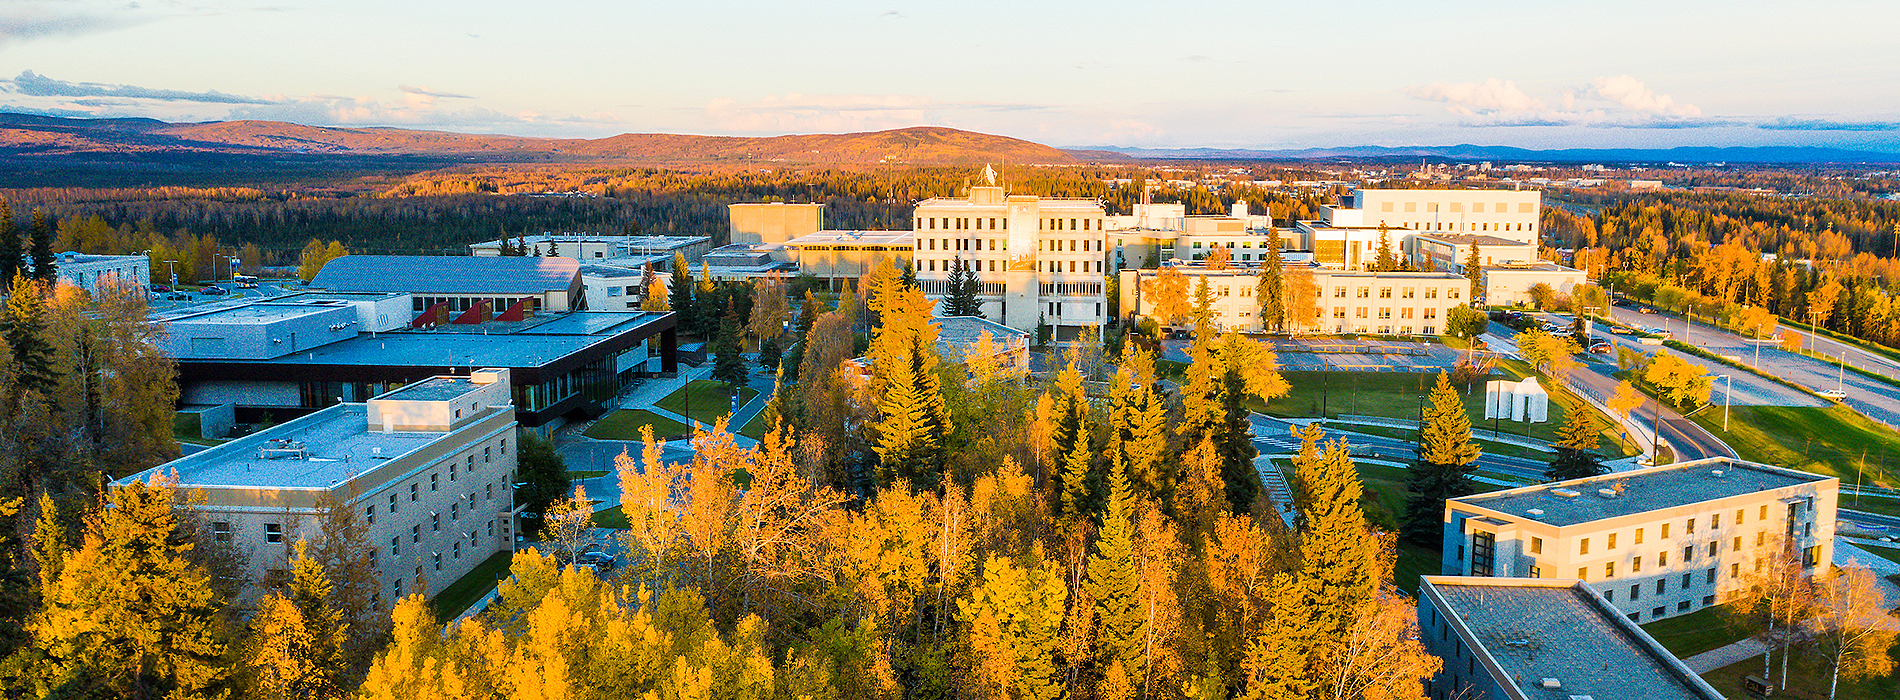 Aerial view of 香港六合彩开奖直播 Troth Yeddha campus in Fairbanks in autumn.